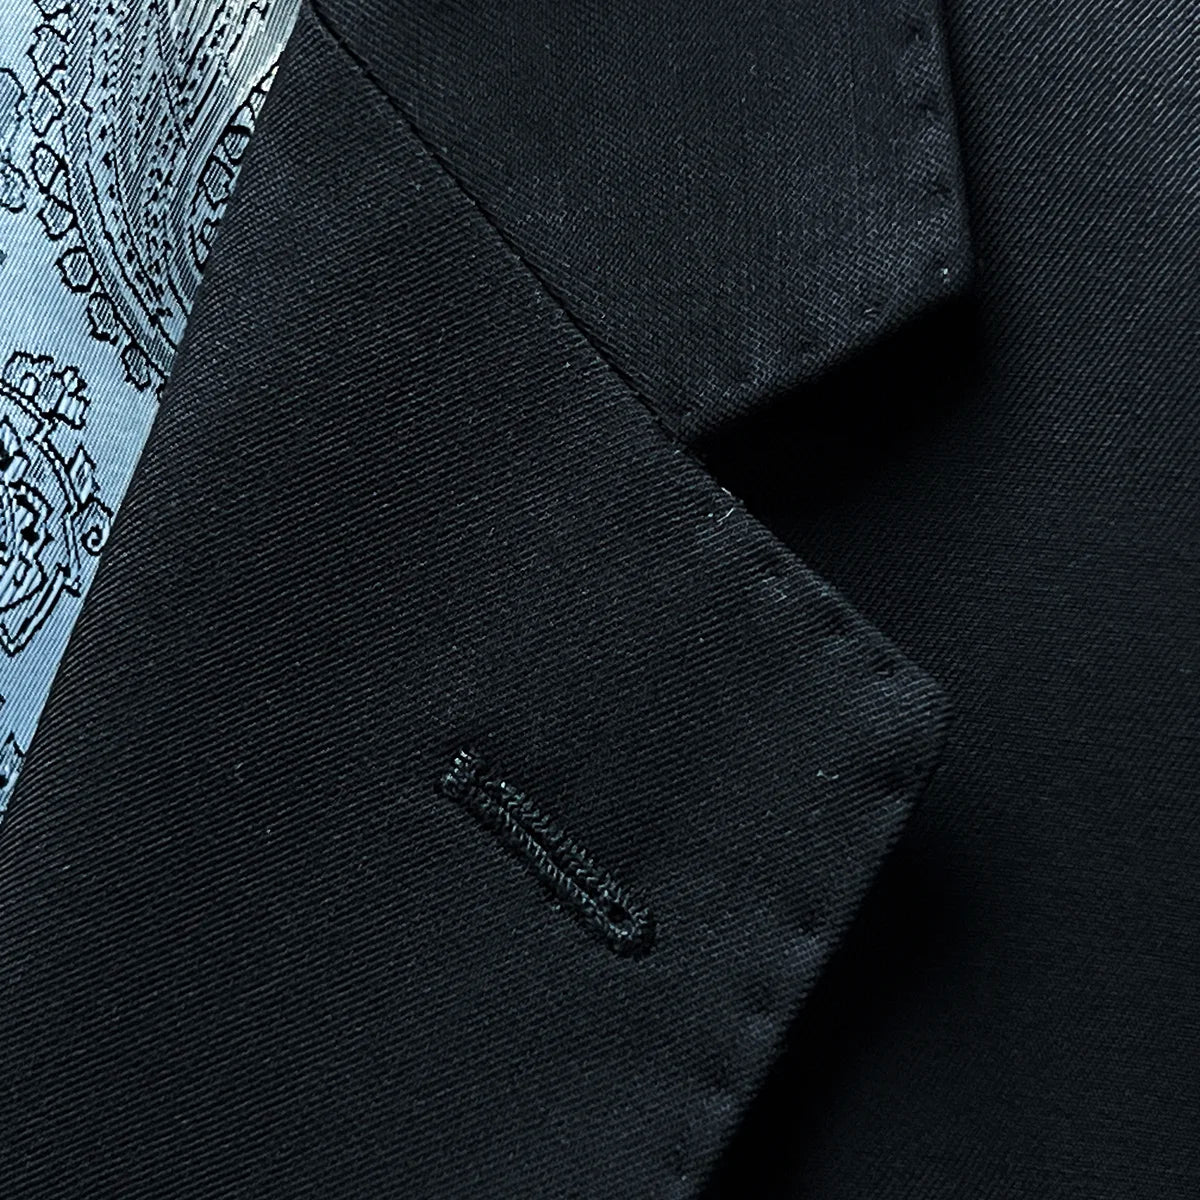 Detailed view of the notch lapel on a black Vitale Barberis Canonico suit jacket, showing its clean lines and pick stitching.